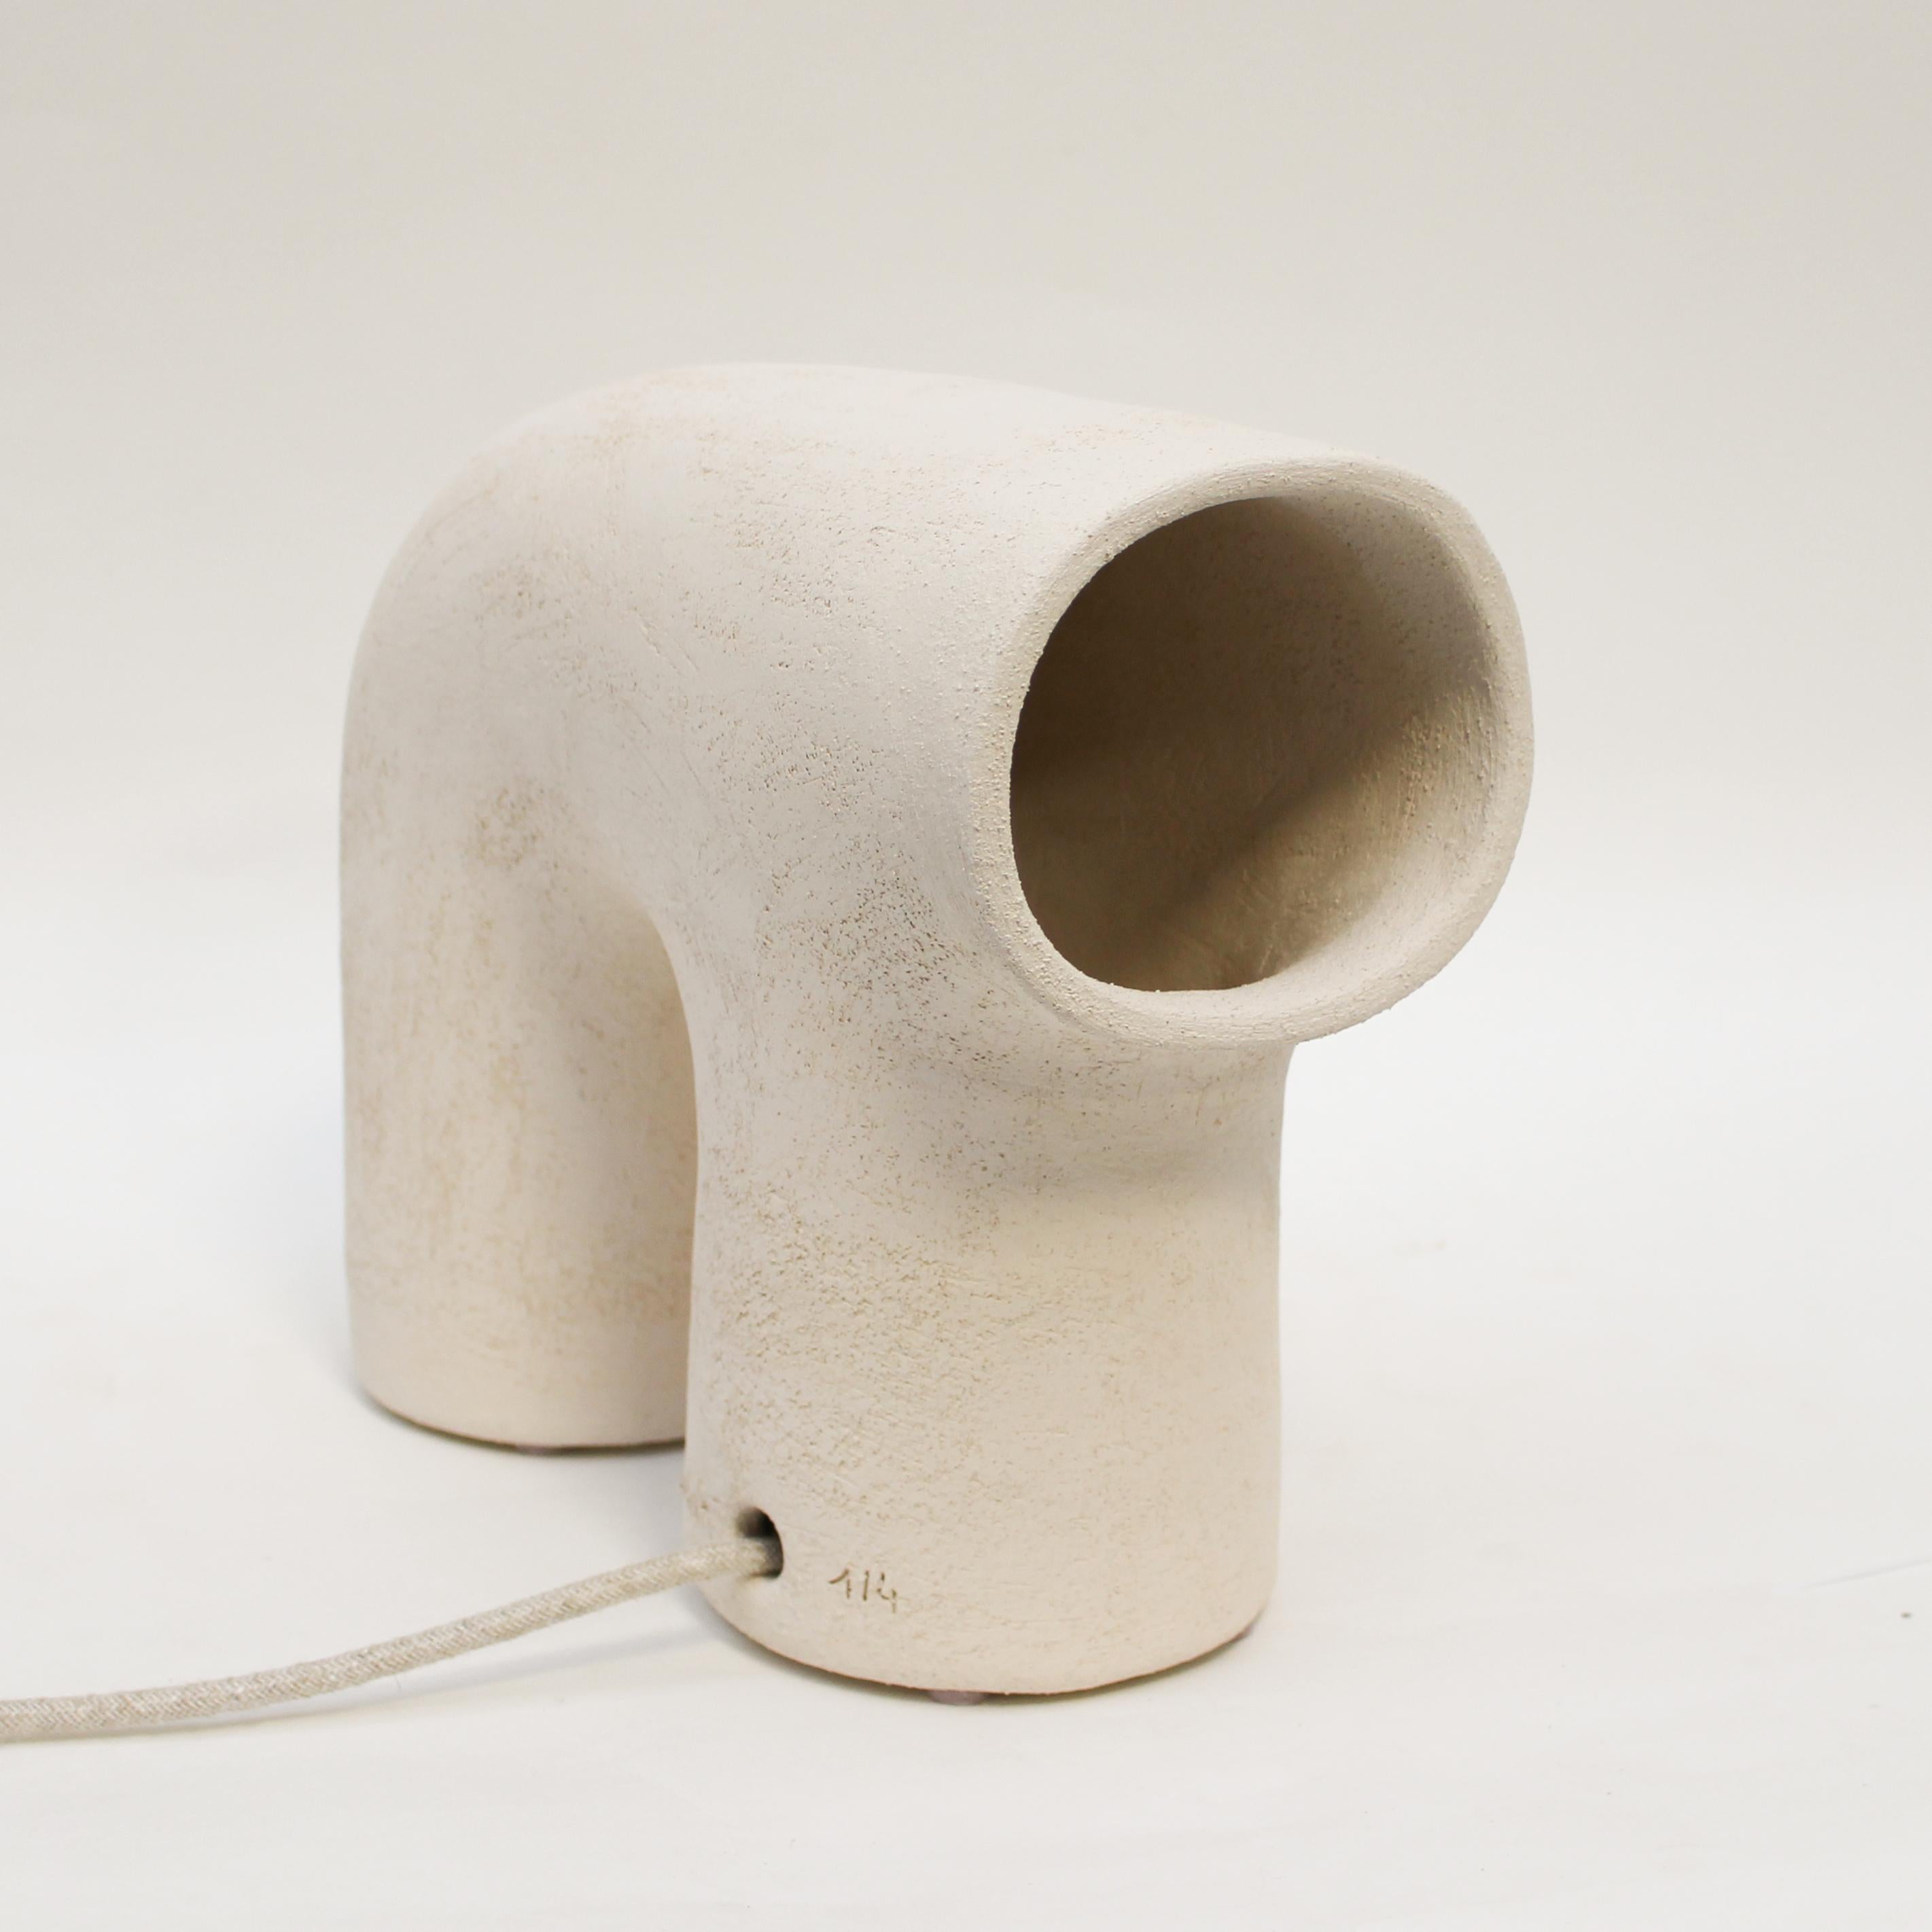 Arche #5 stoneware lamp by Elisa Uberti
Dimensions: D 10 x W 20 x H 25 cm
Materials: white stoneware.
This product is handmade, dimensions may vary.


All our lamps can be wired according to each country. If sold to the USA it will be wired